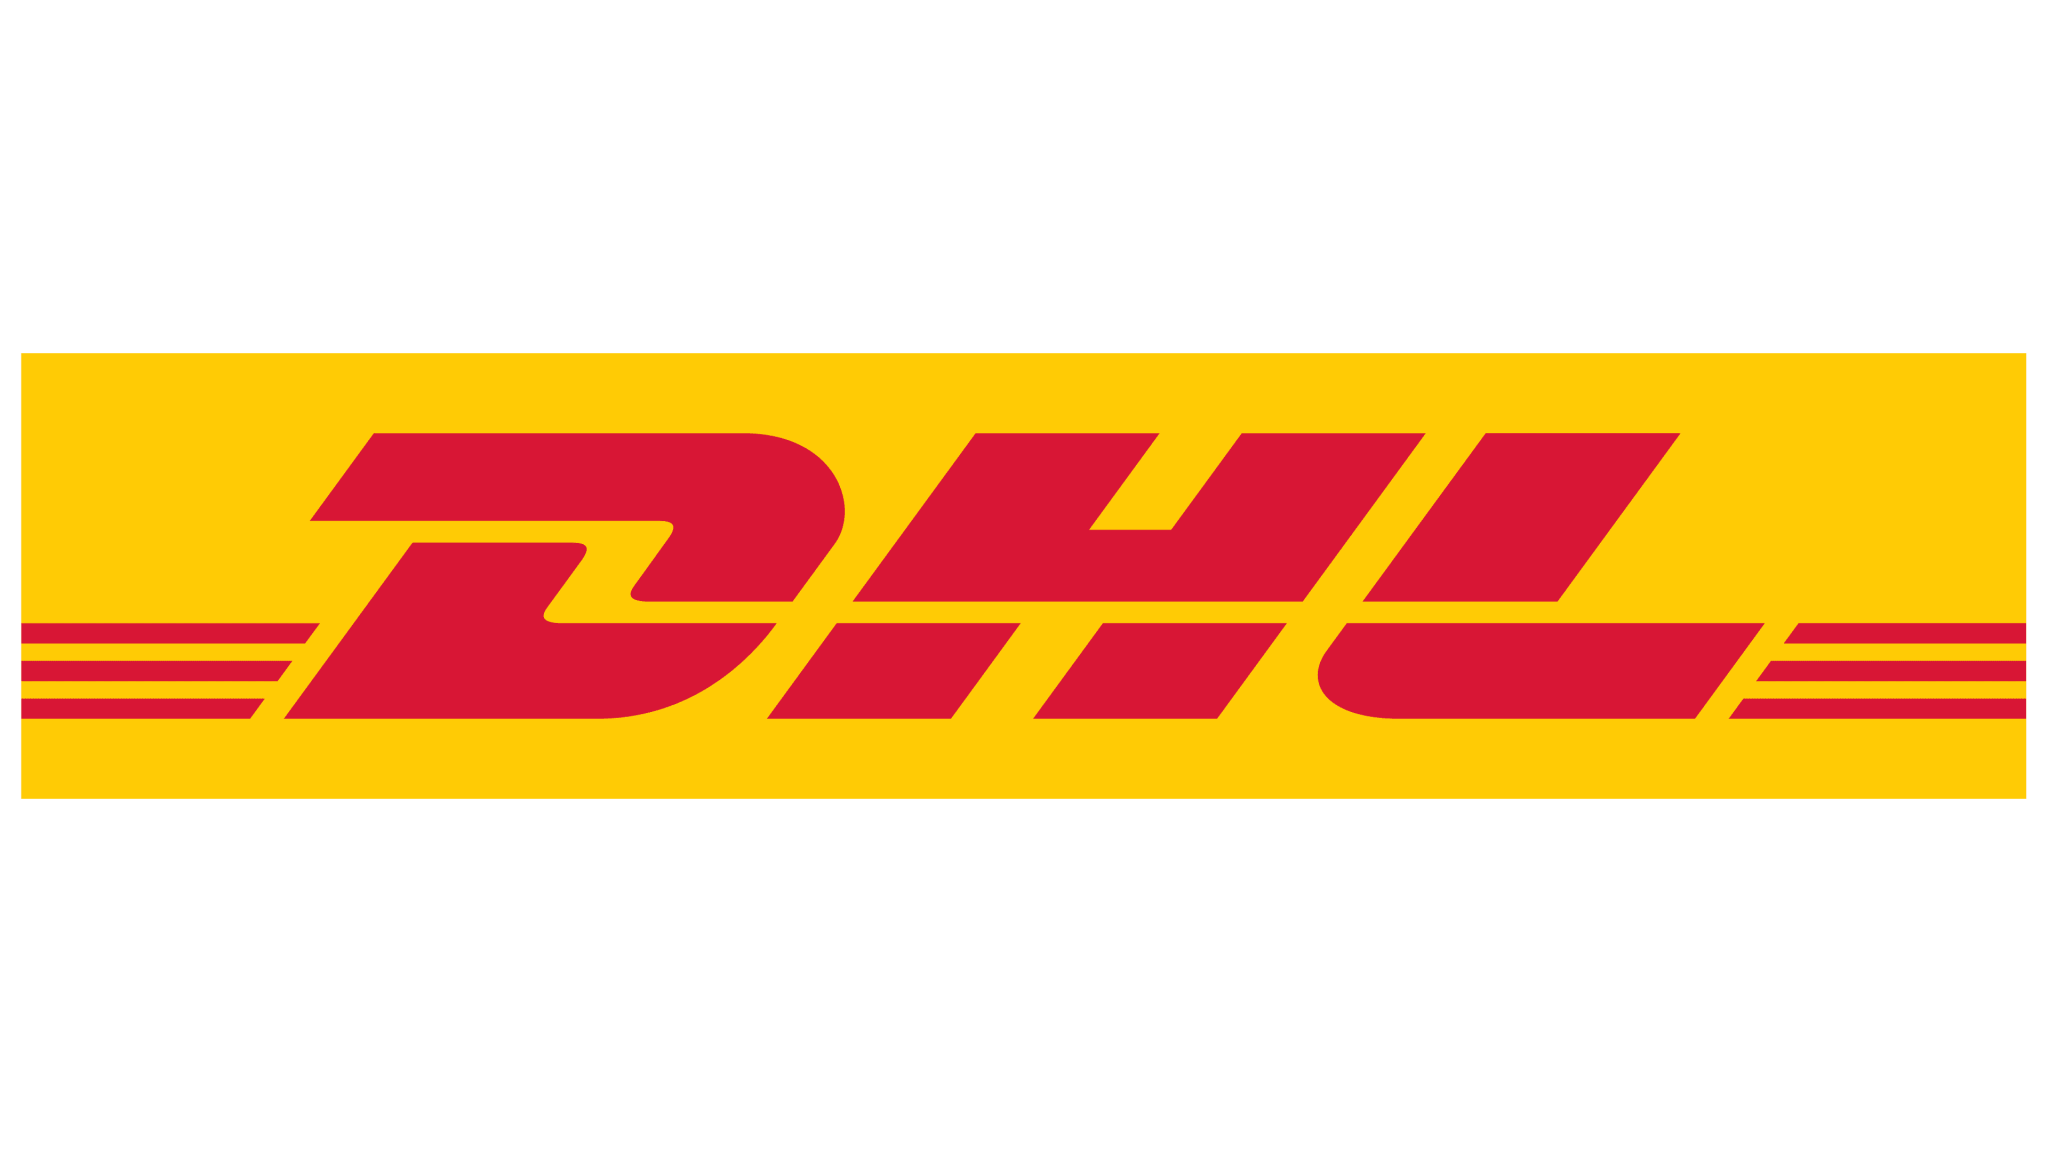 Dhl Png - Download Free Png Images